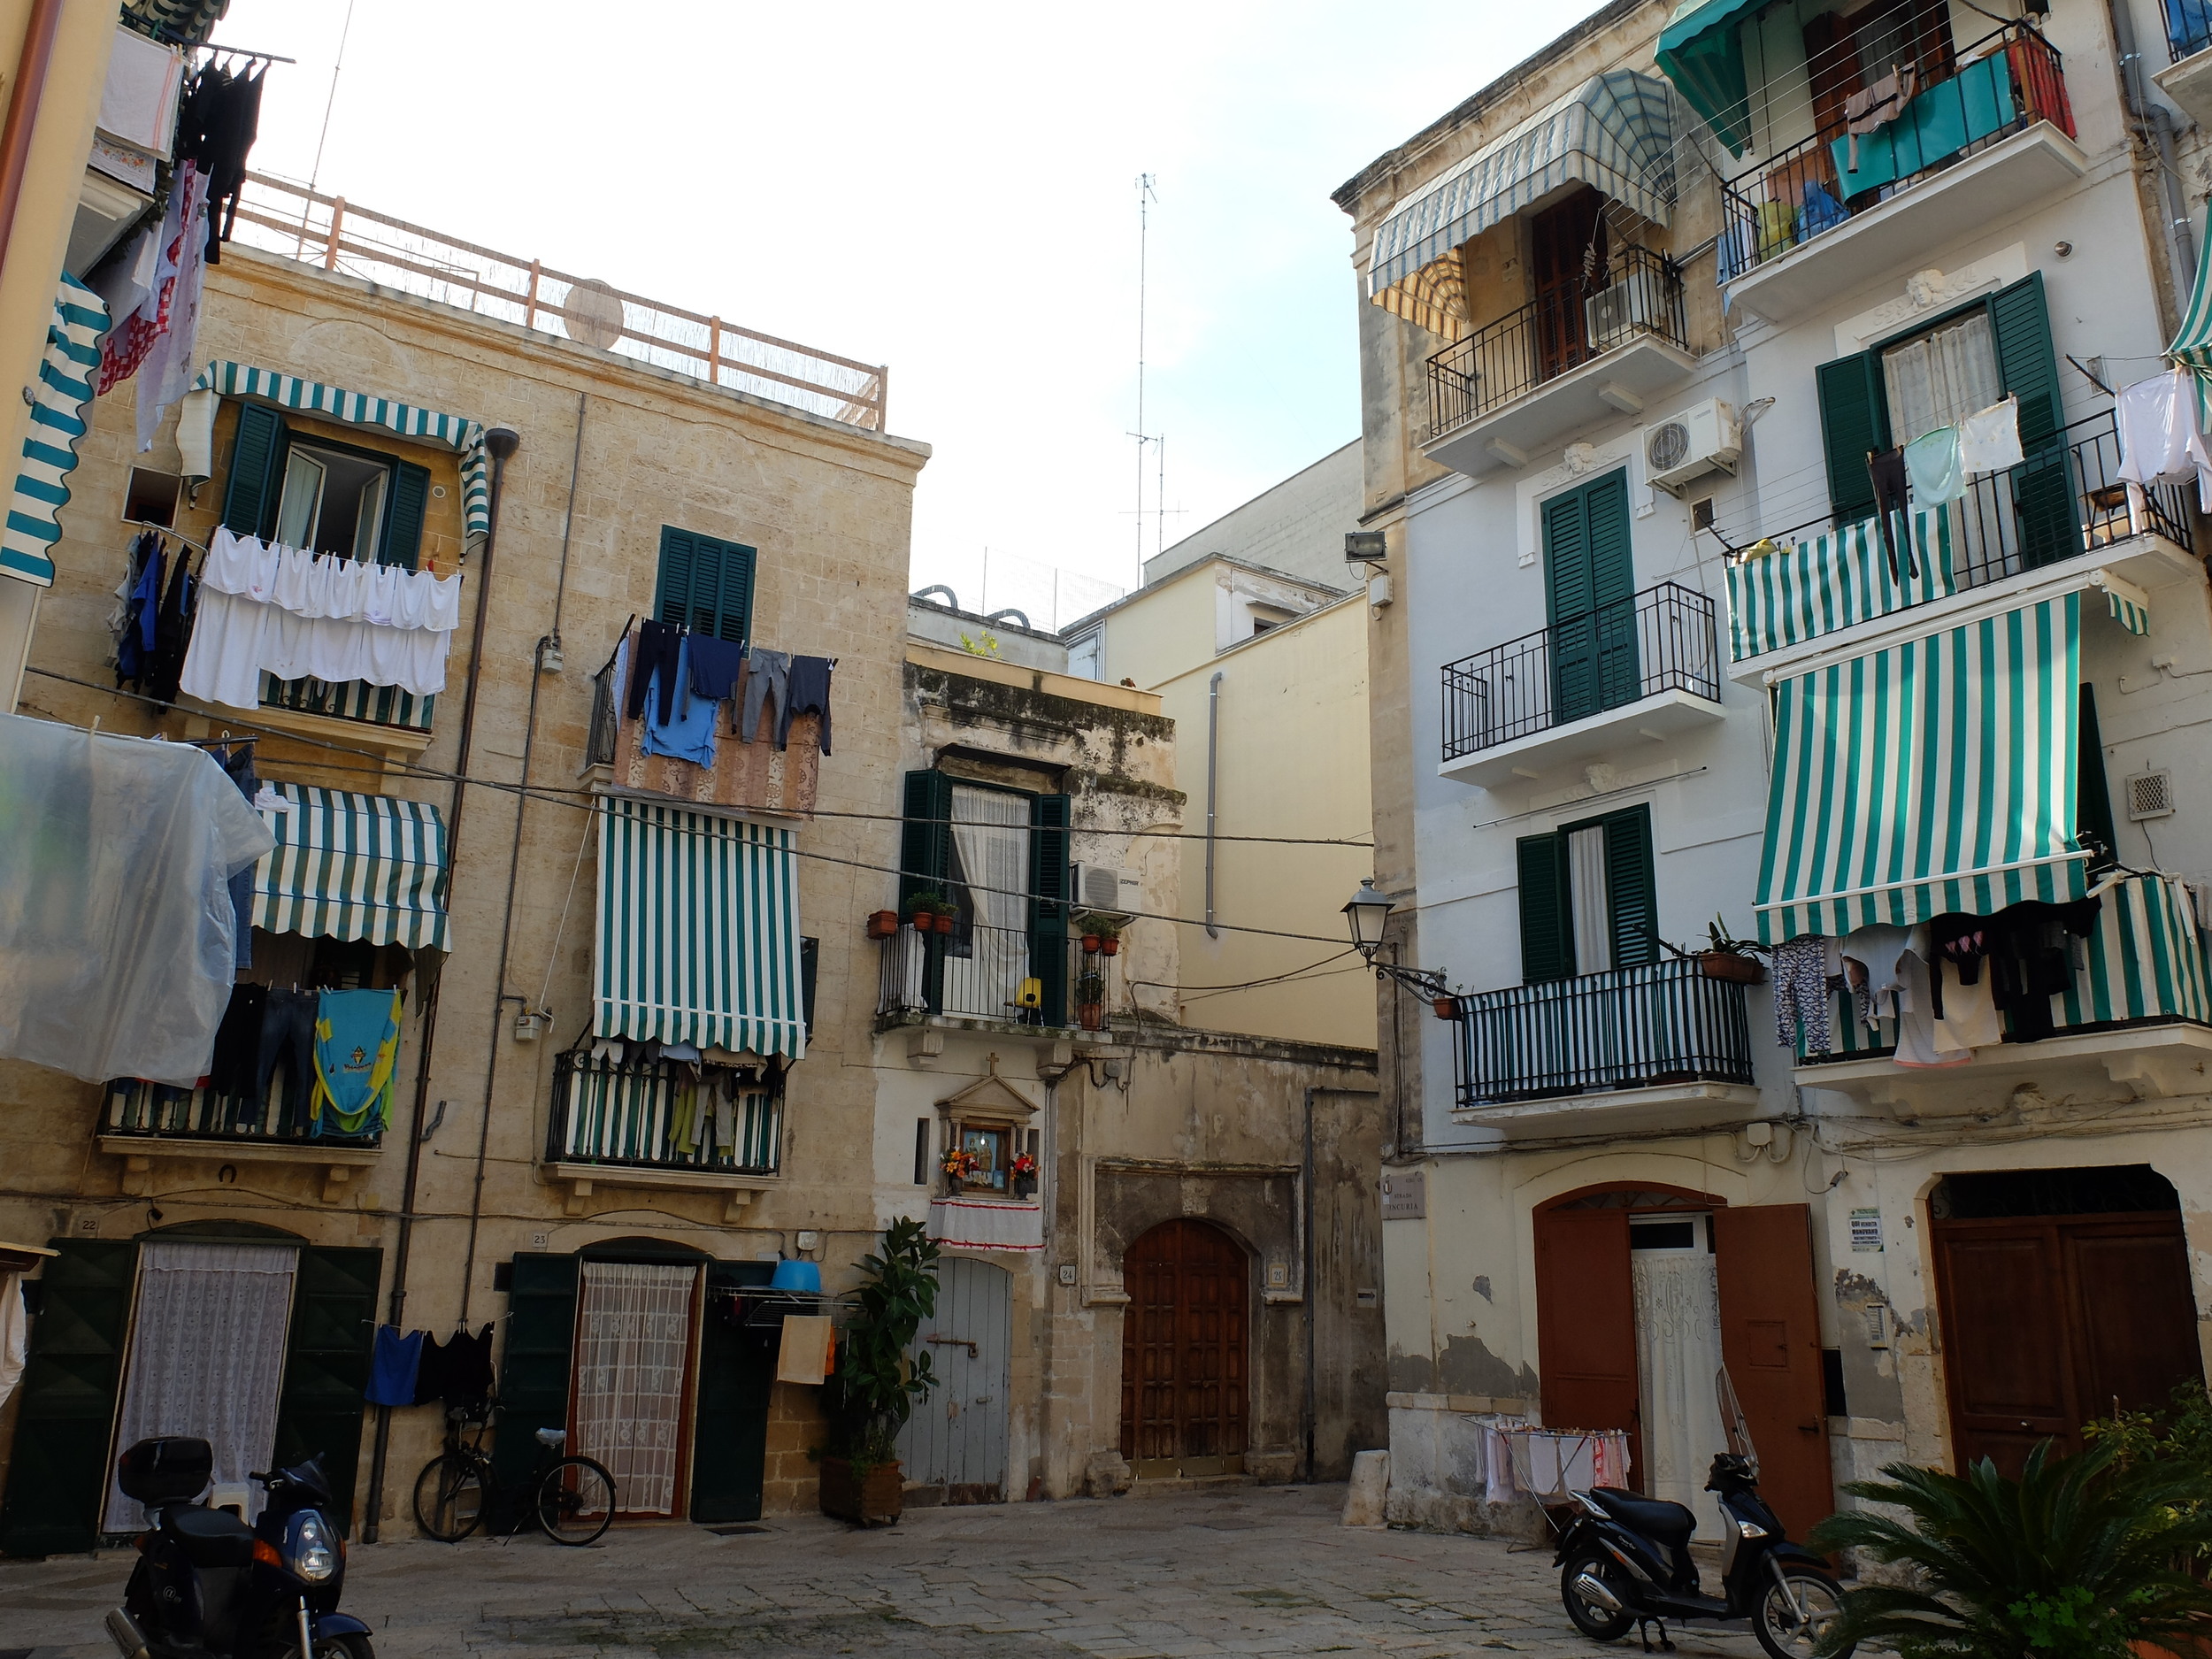 Typical dead-end street, Old Town, Bari, Italy